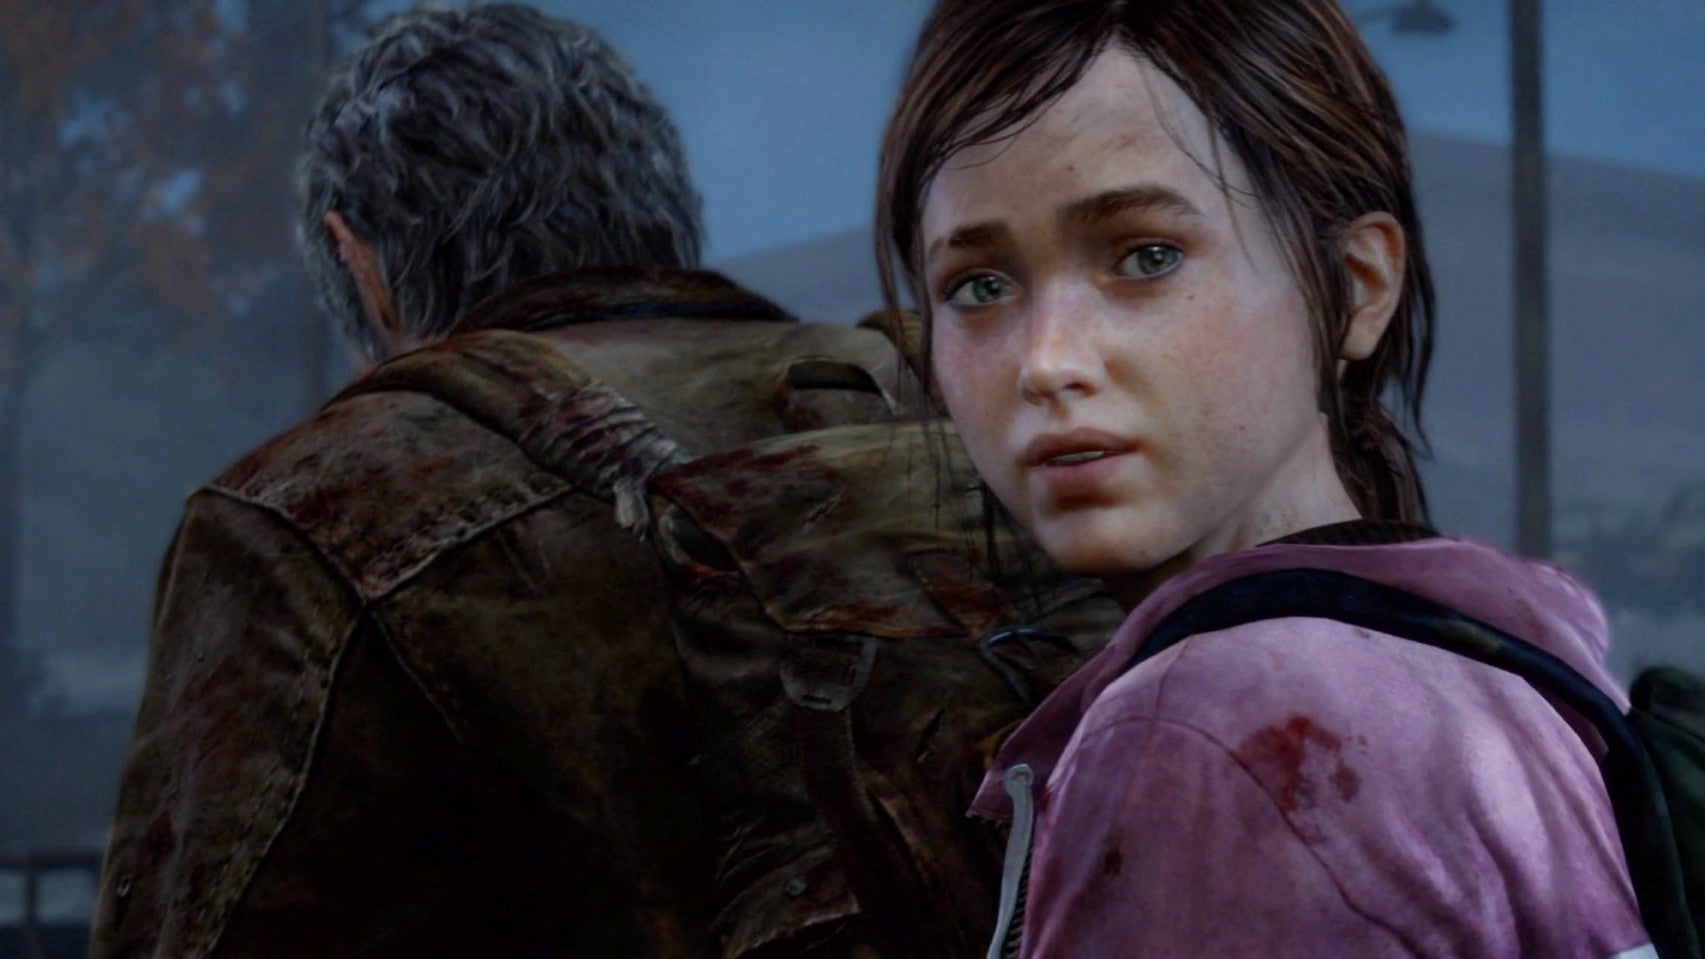 Image for The Last of Us Part 1 Remake is not a "cash grab", says developer